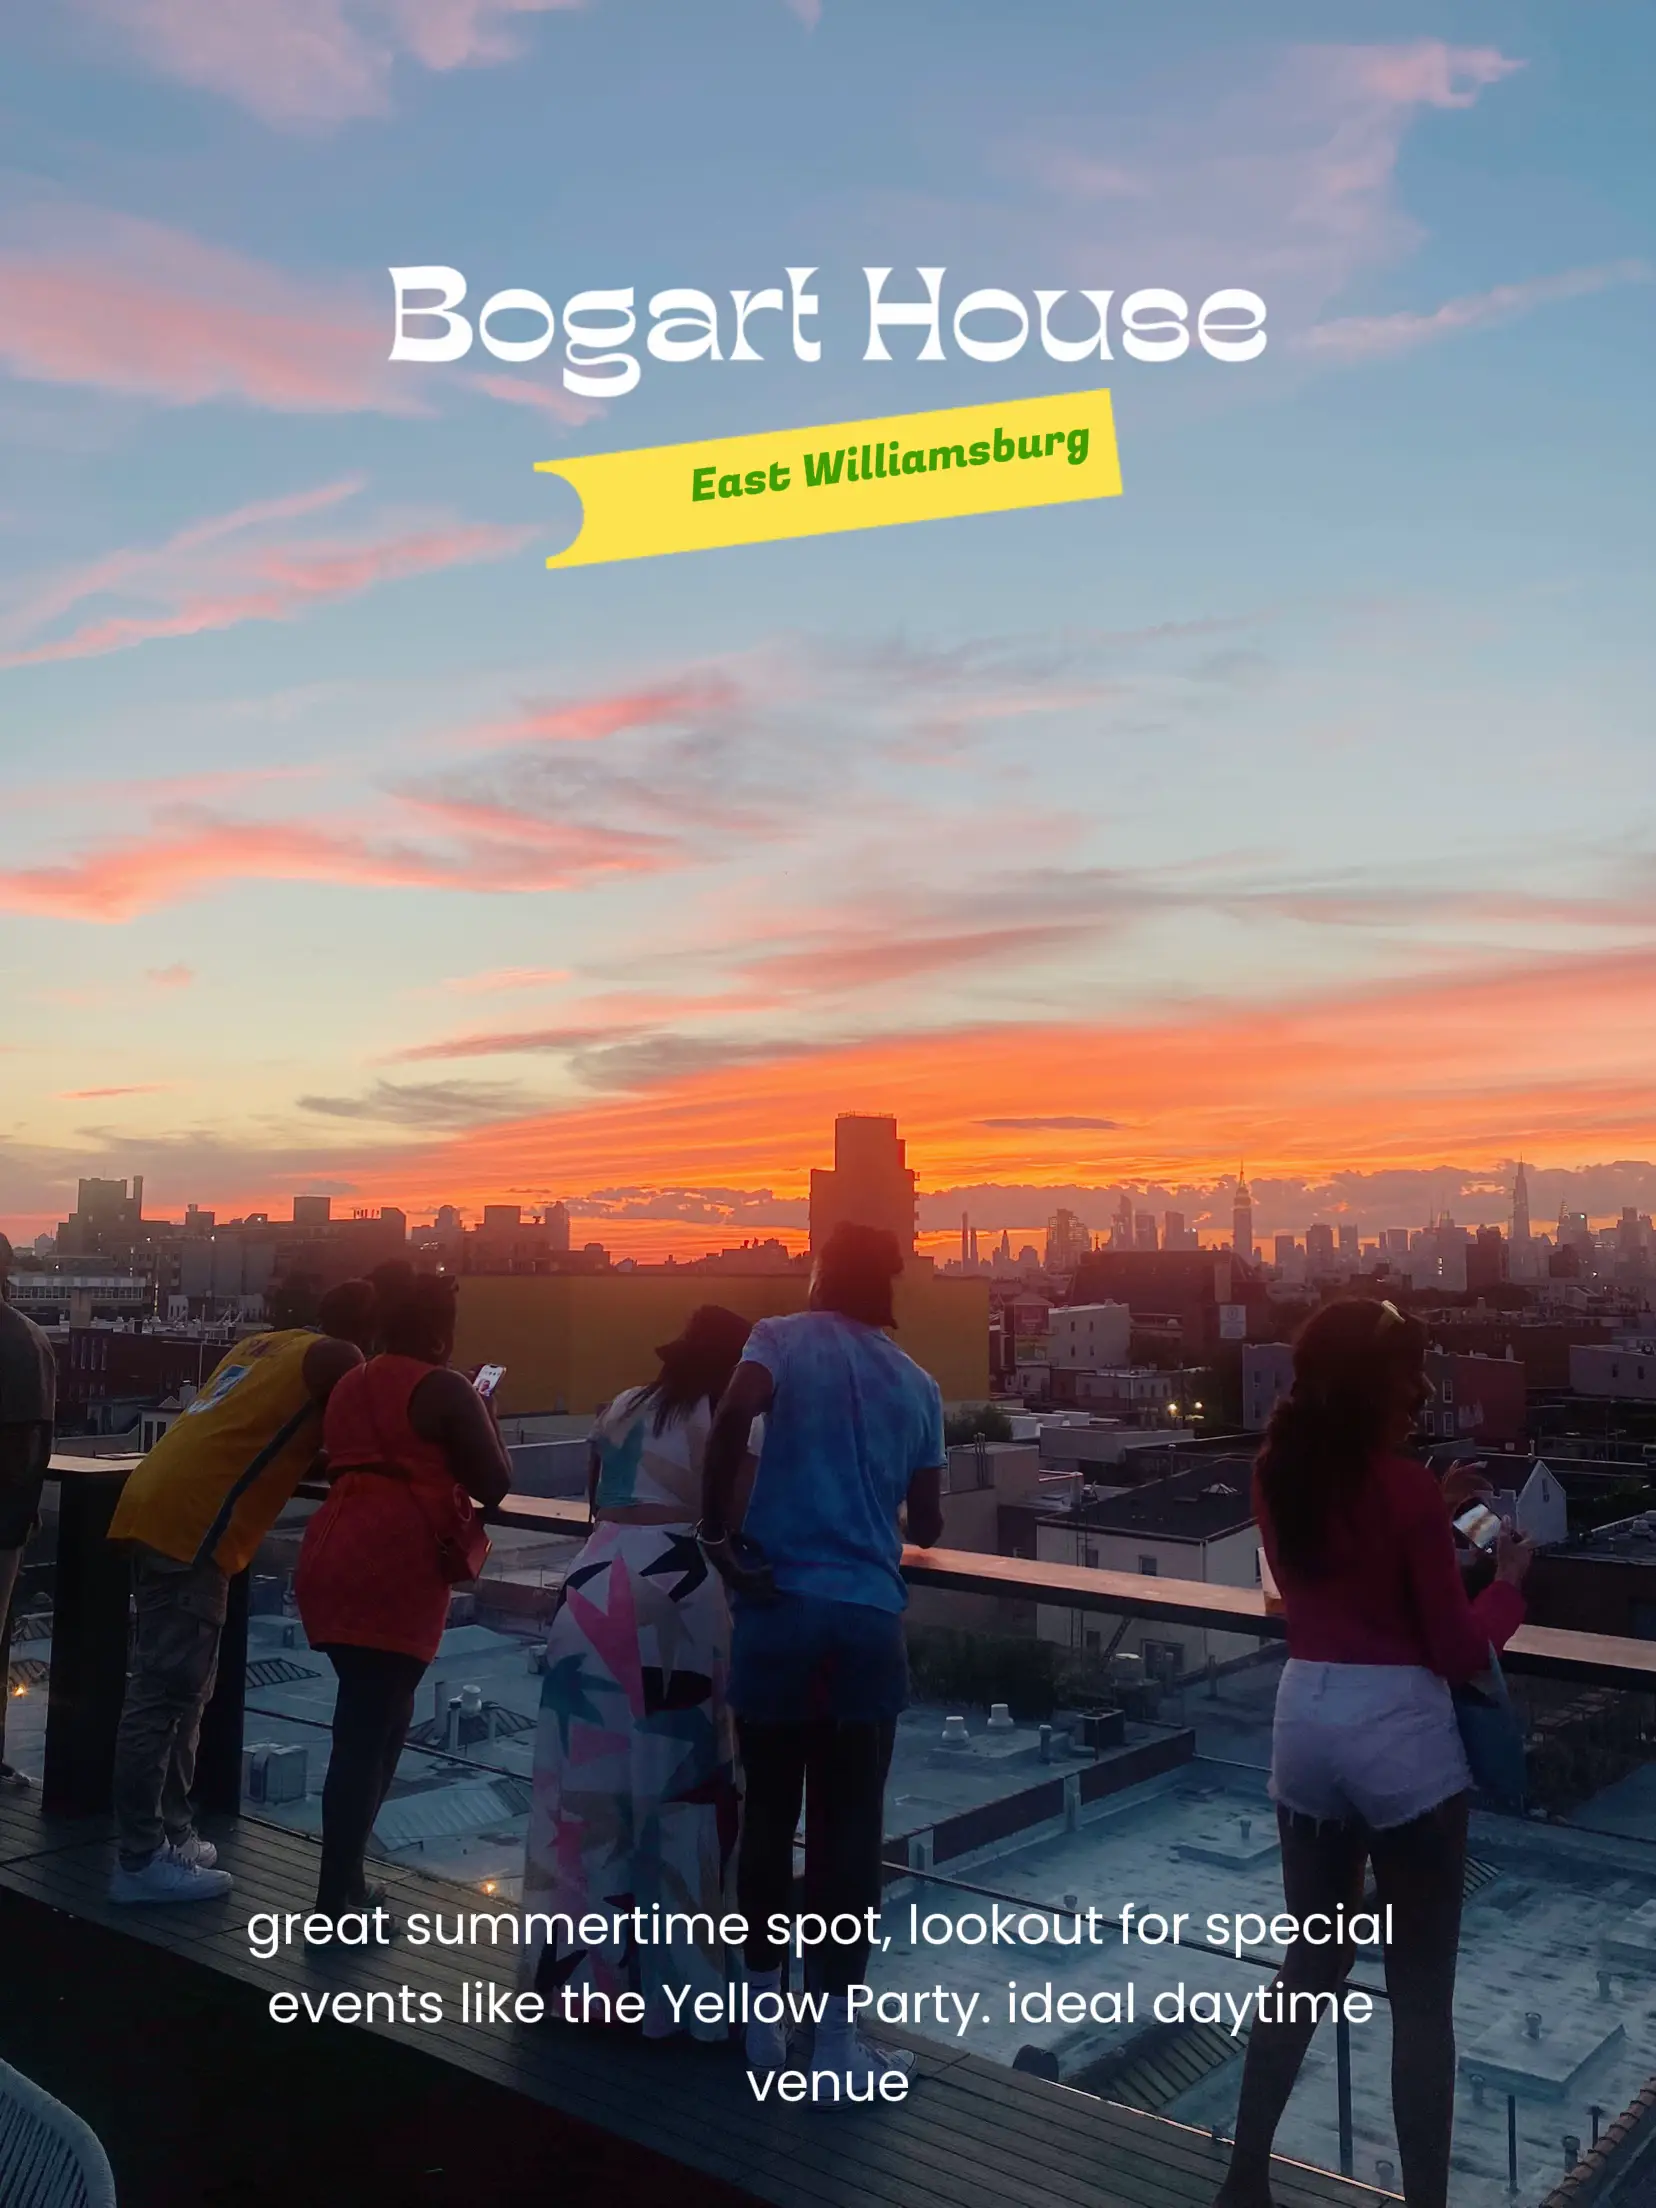  A group of people are standing on a rooftop at Bogart House East Williamsburg.